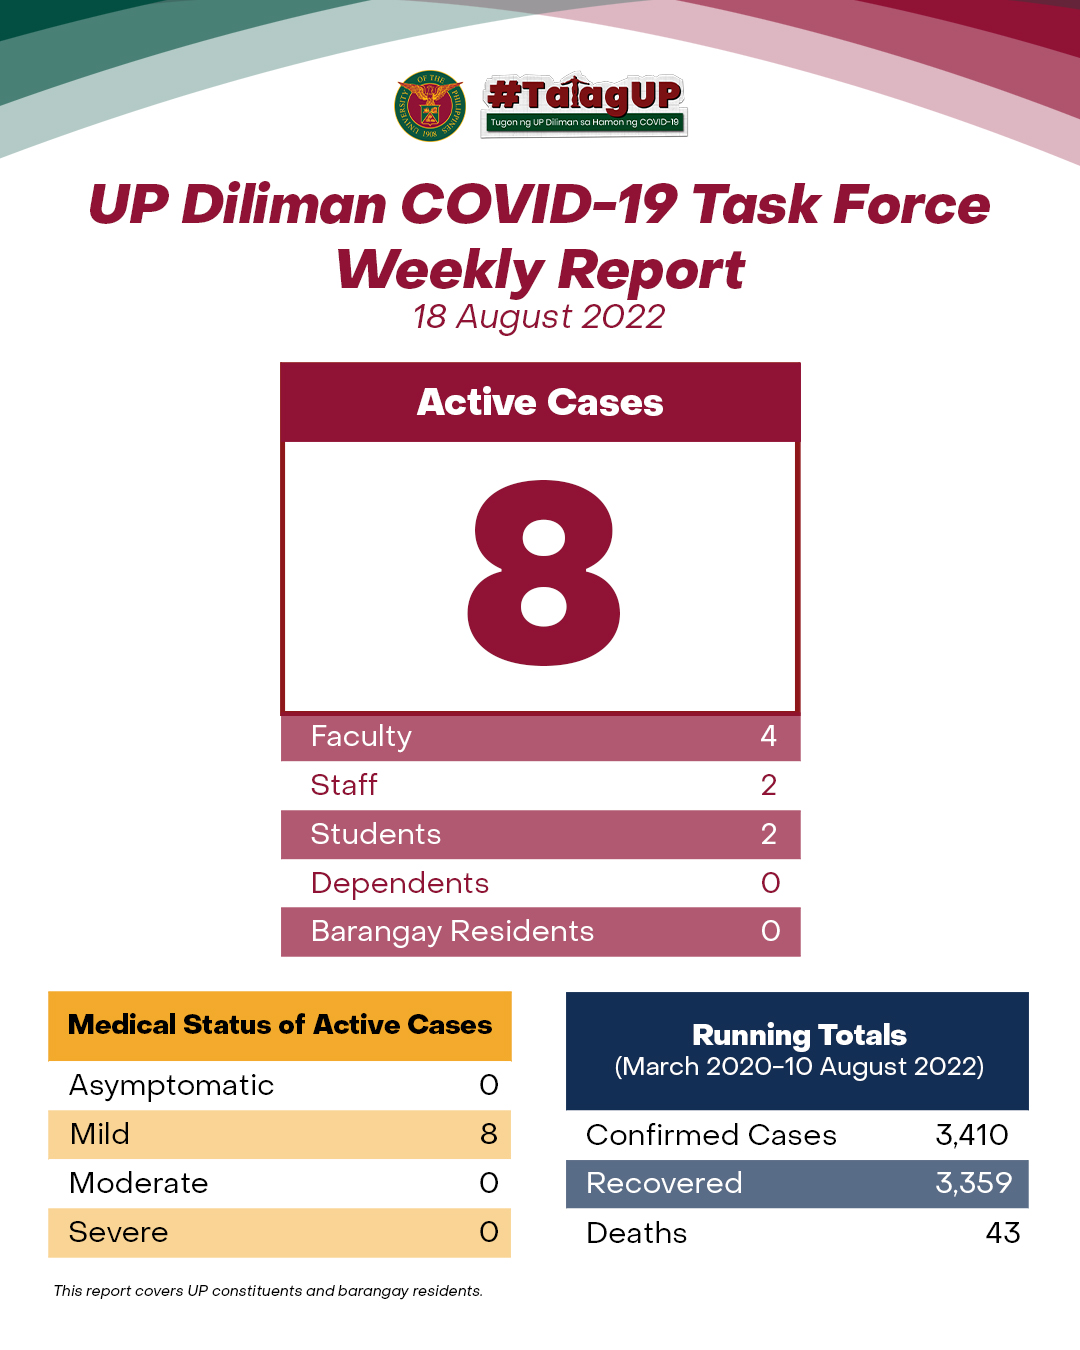 UP Diliman COVID-19 Task Force Weekly Report (18 August 2022)